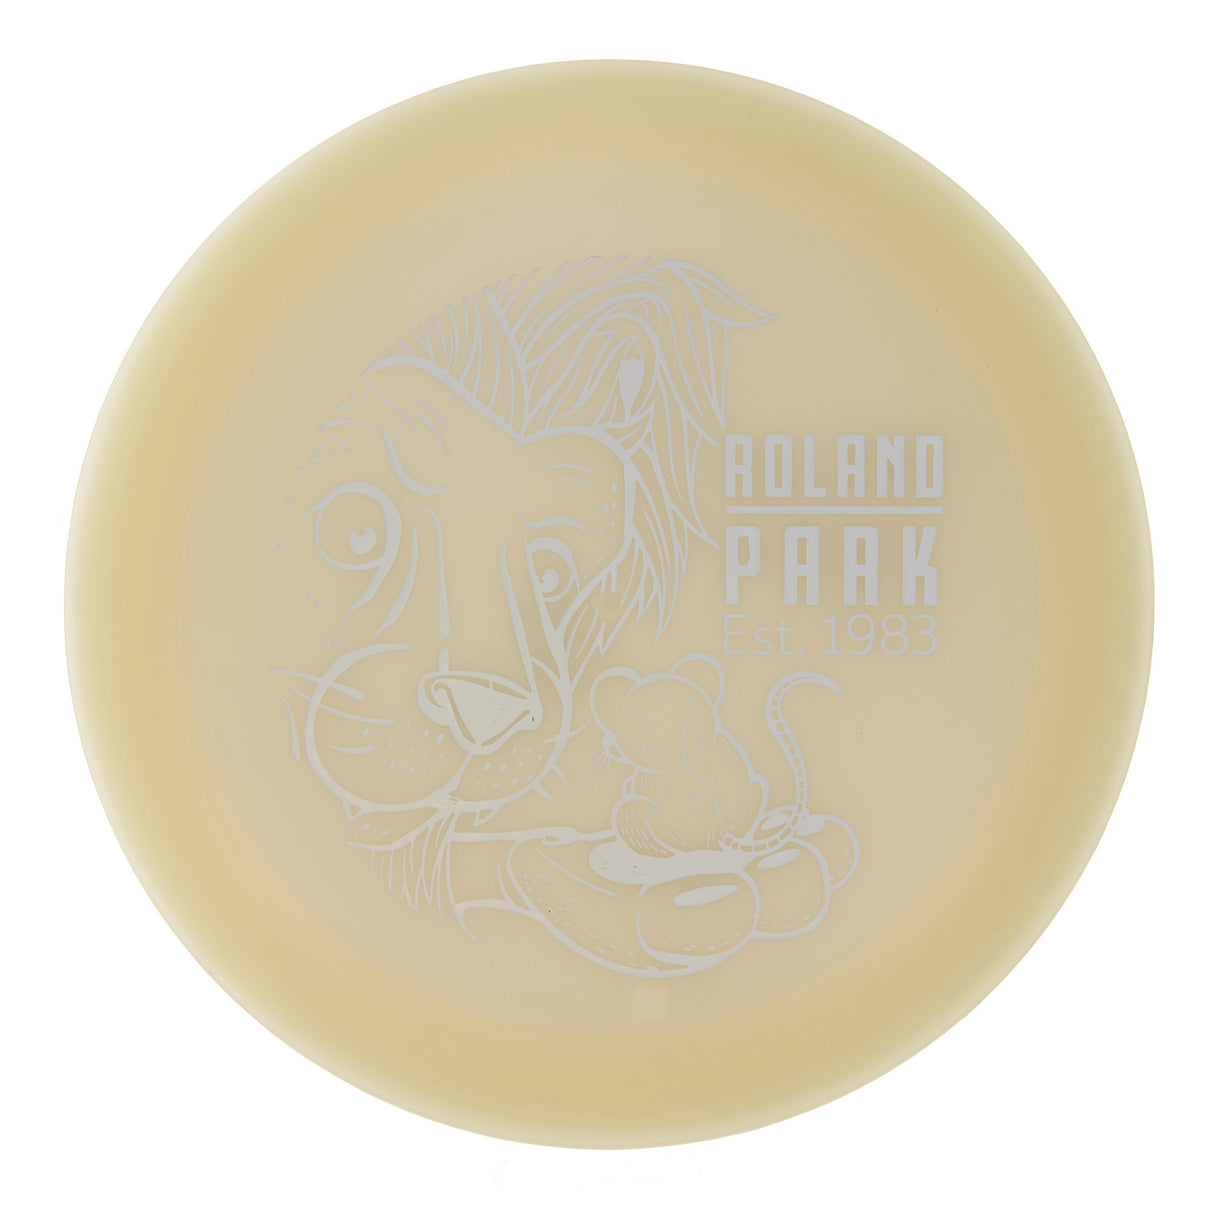 Thought Space Athletics Synapse - 2023 Roland Park Fundraiser Glow 176g | Style 0004